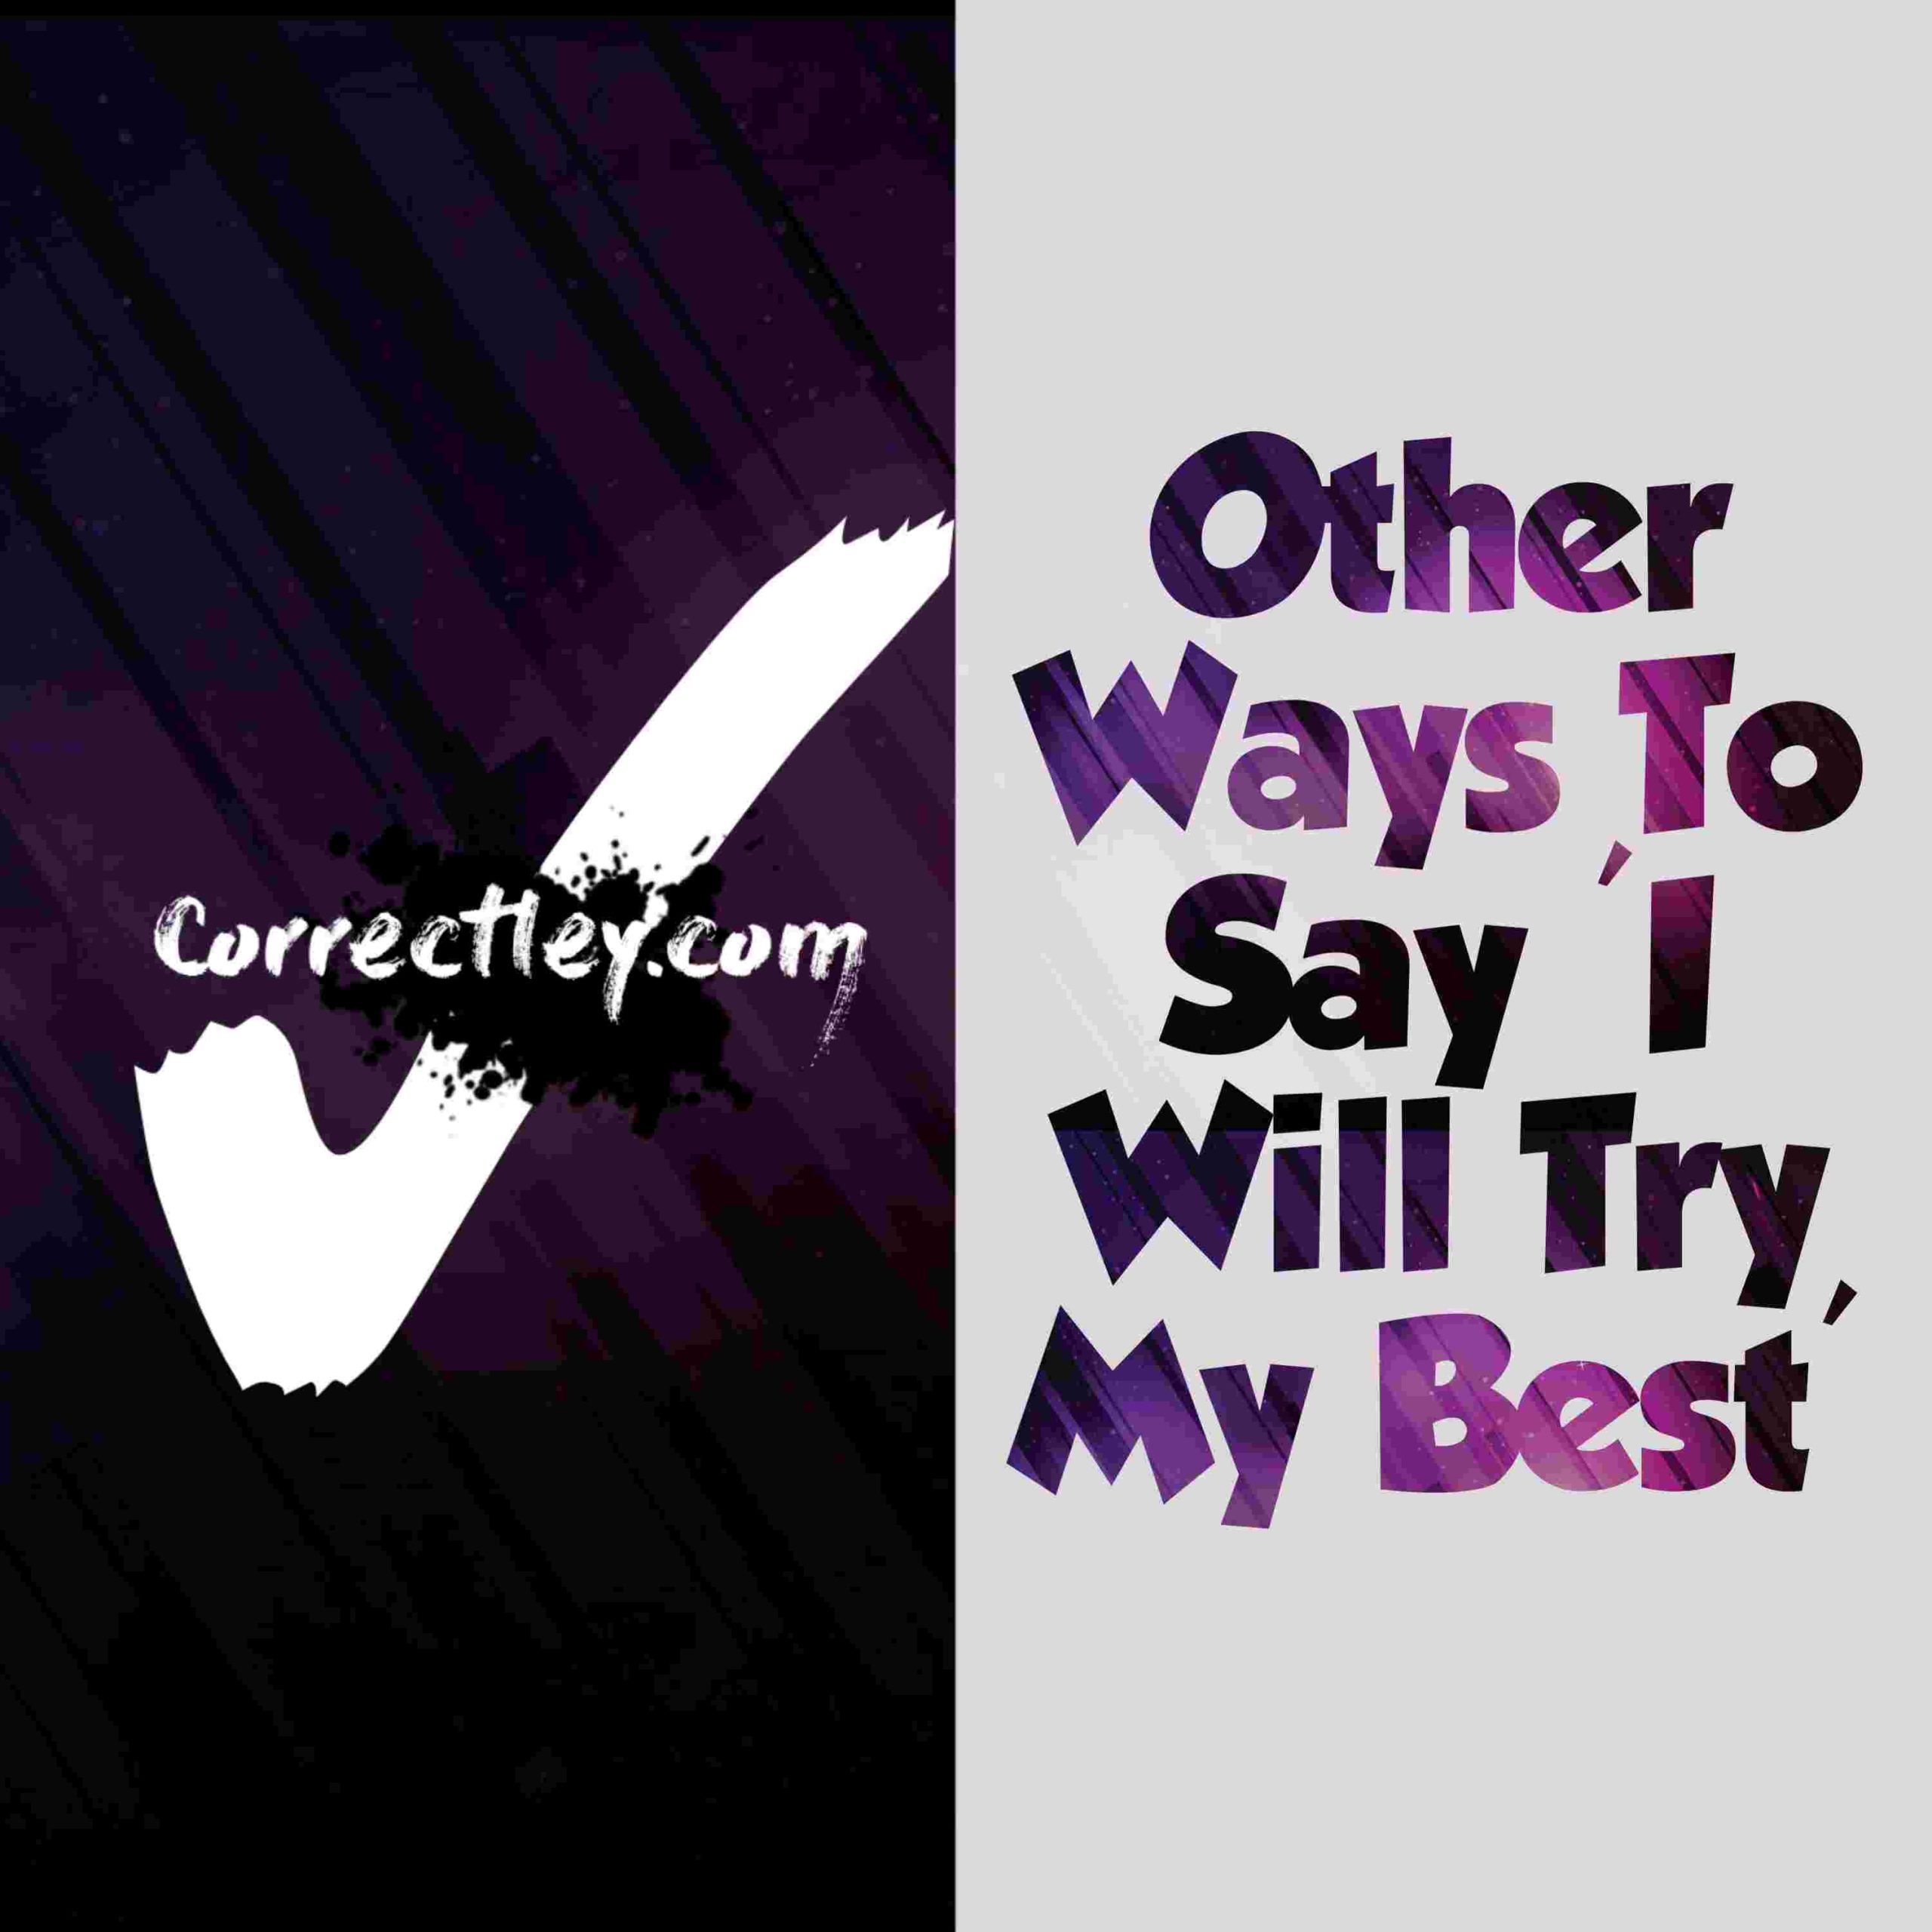 Other Ways To Say ‘I will try my best.’